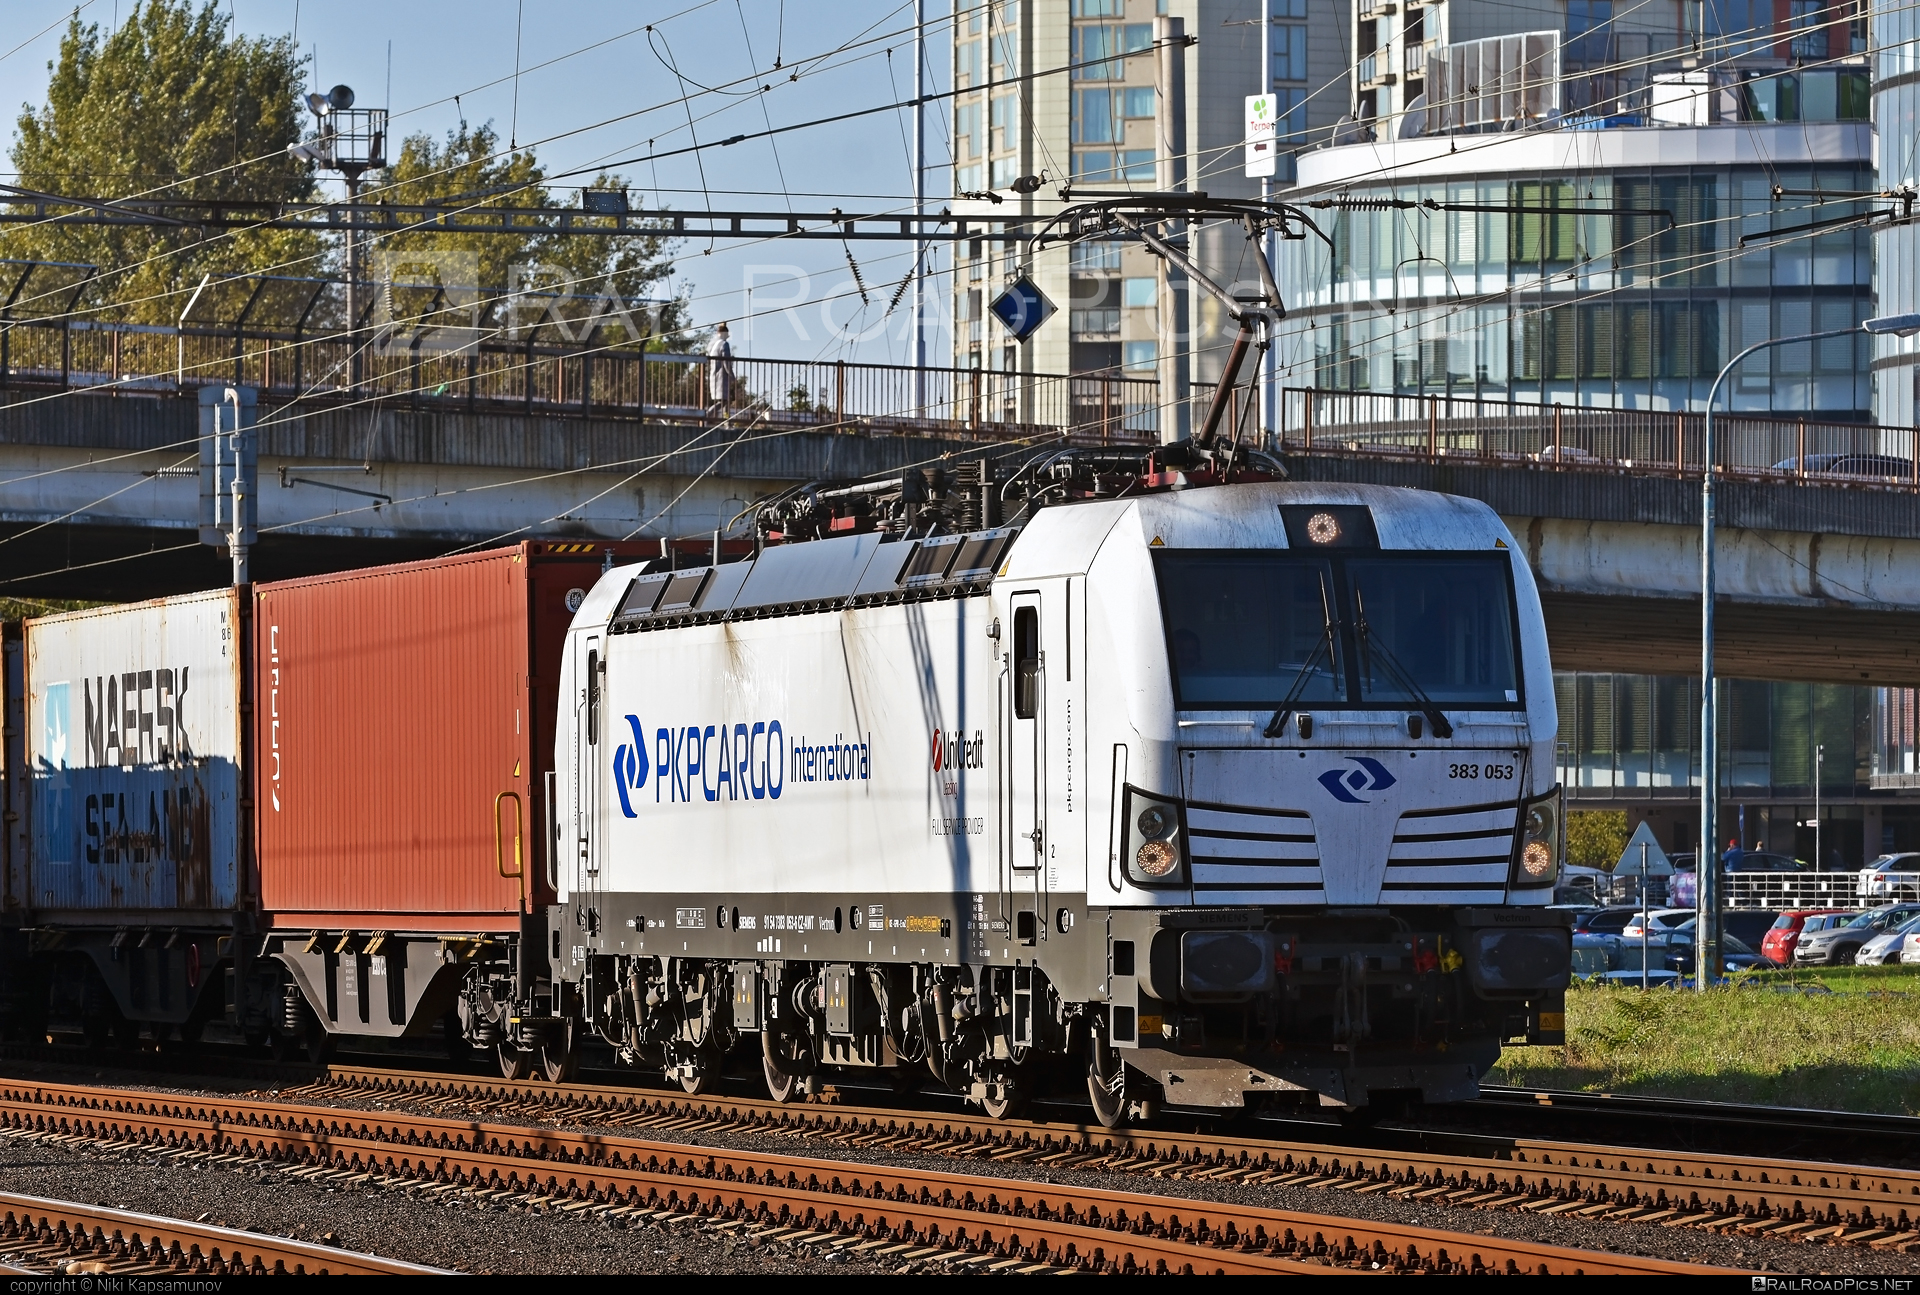 Siemens Vectron MS - 383 053 operated by PKP CARGO INTERNATIONAL a.s. #flatwagon #pkp #pkpcargo #pkpcargointernational #pkpcargointernationalas #siemens #siemensvectron #siemensvectronms #vectron #vectronms